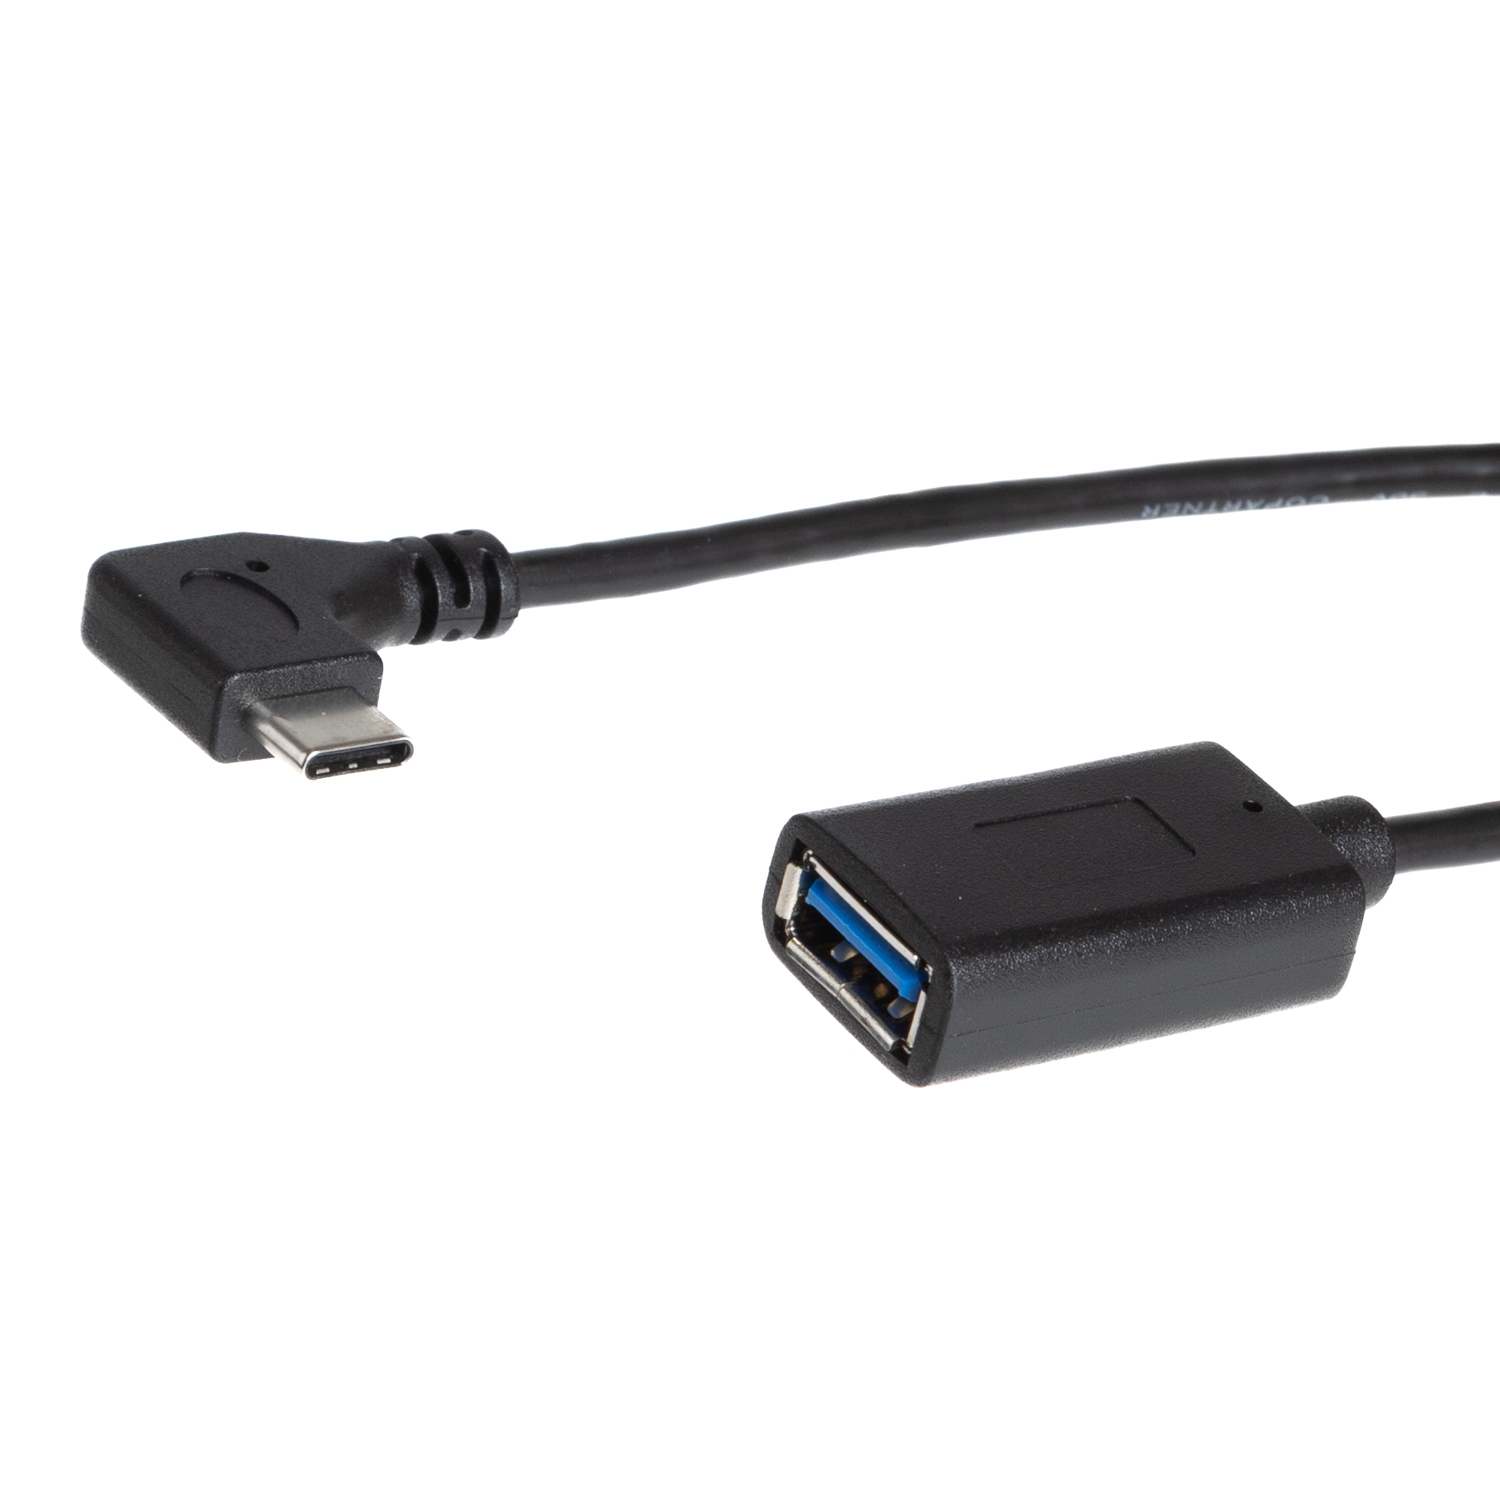 Cable USB 3.1 Type-C™ male angled to USB 3.0 A female 25cm